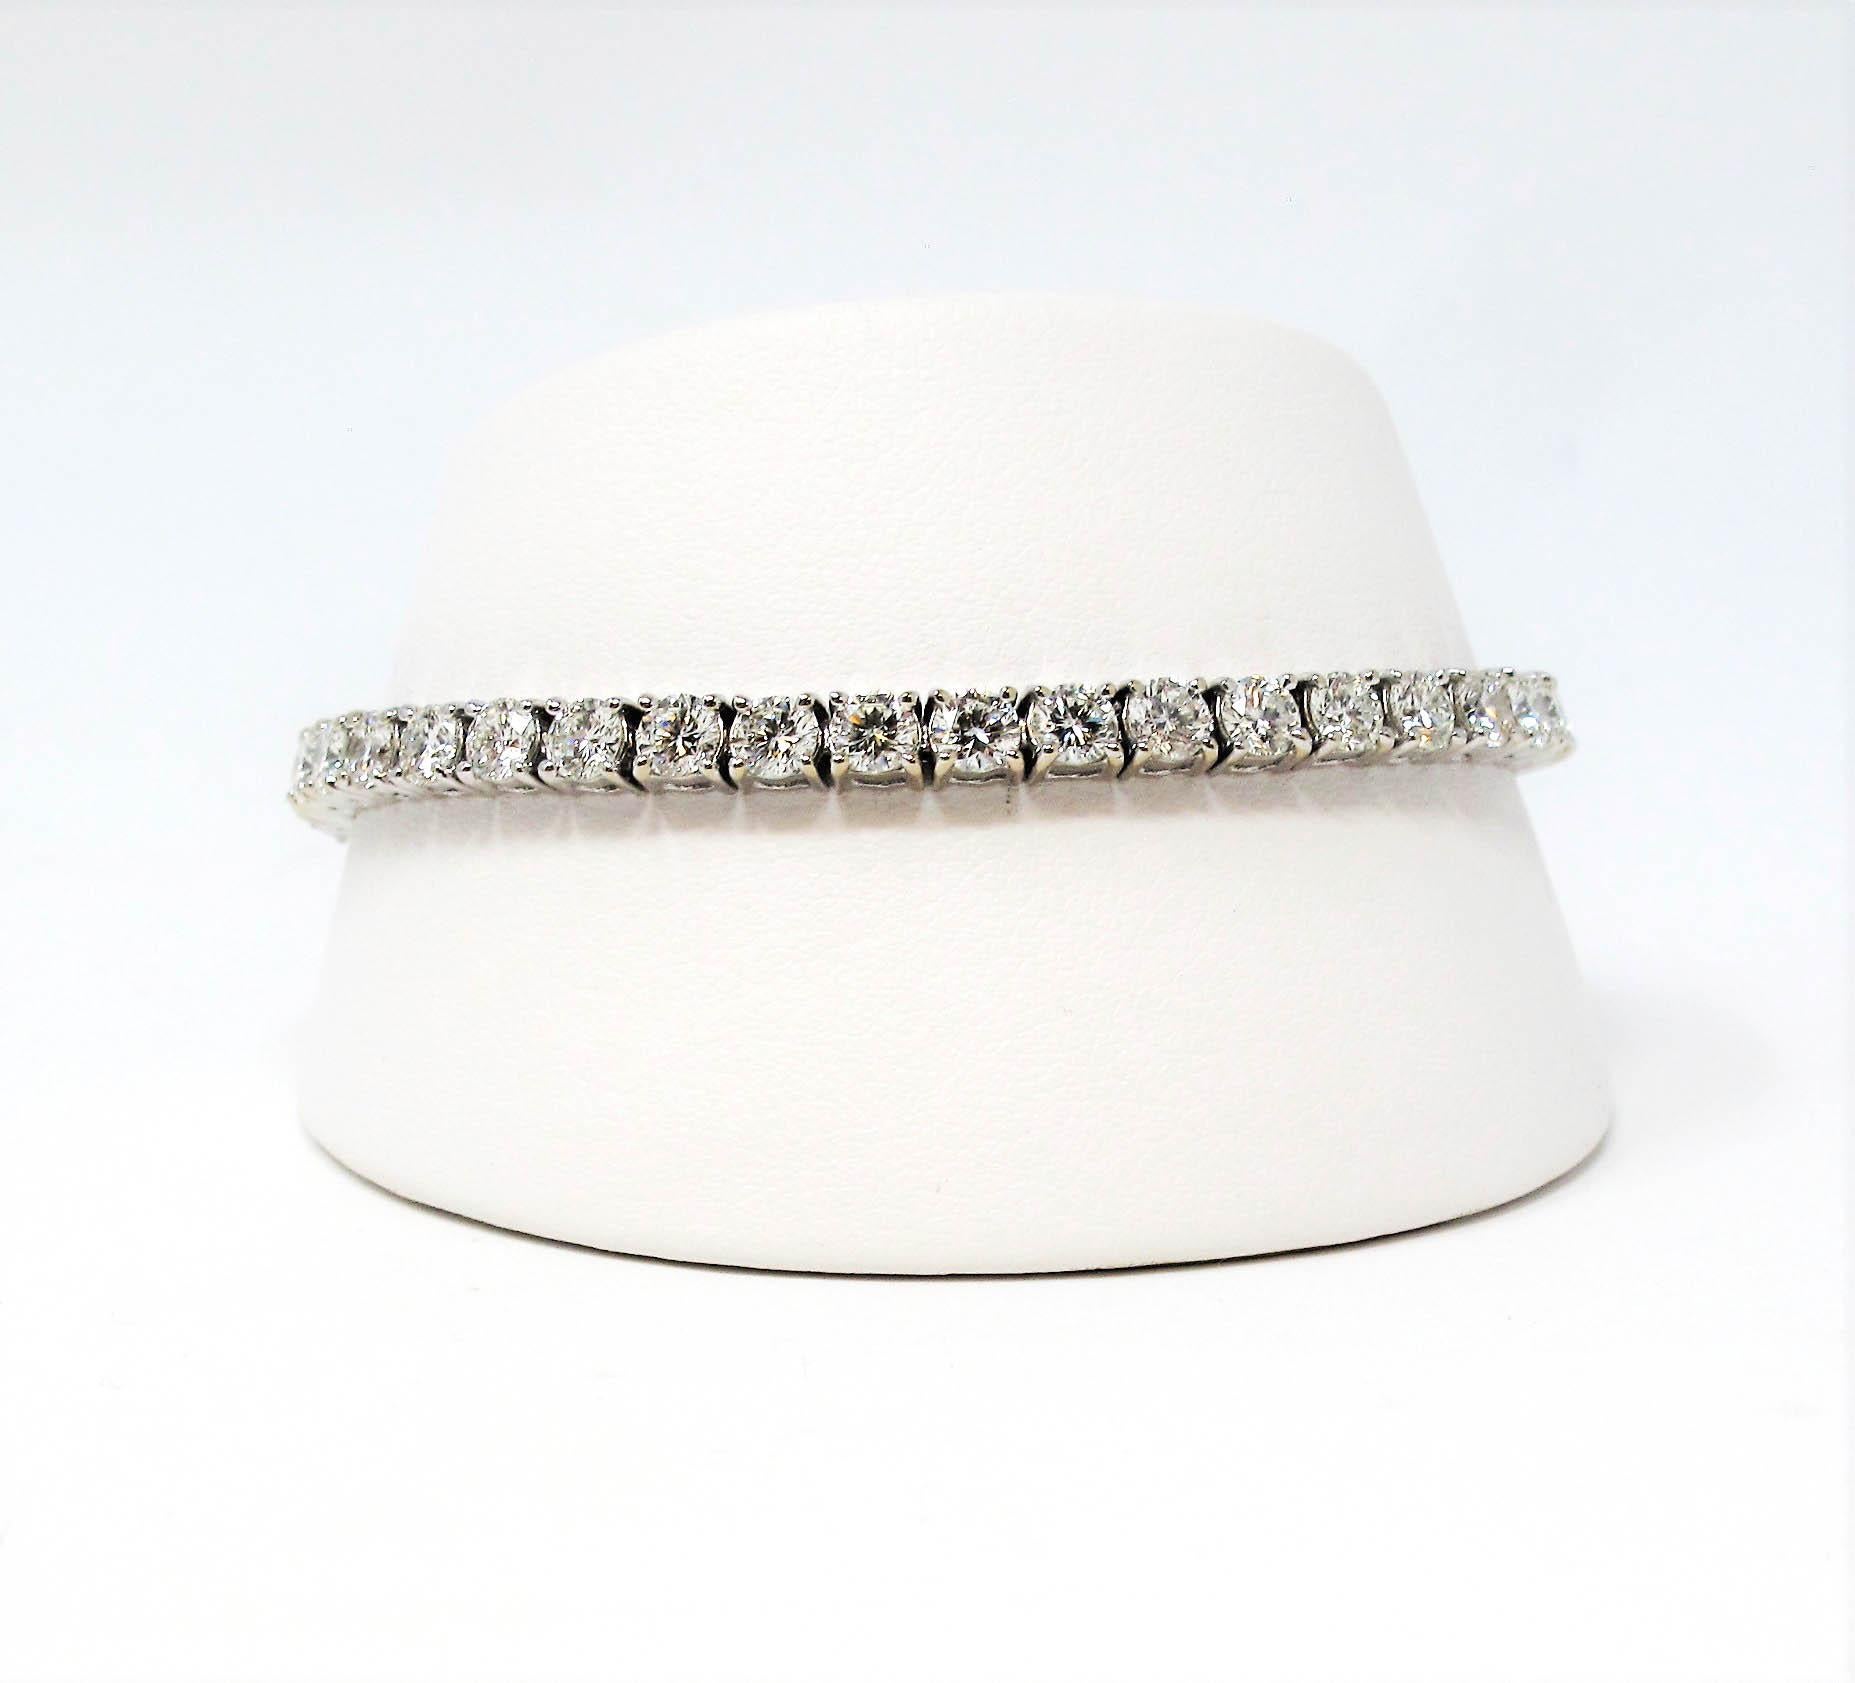 This is an absolutely stunning diamond tennis bracelet that will stand the test of time. The elegant white gold setting paired with the timeless round diamonds makes this piece a true classic that will never go out of style. 
   
This gorgeous